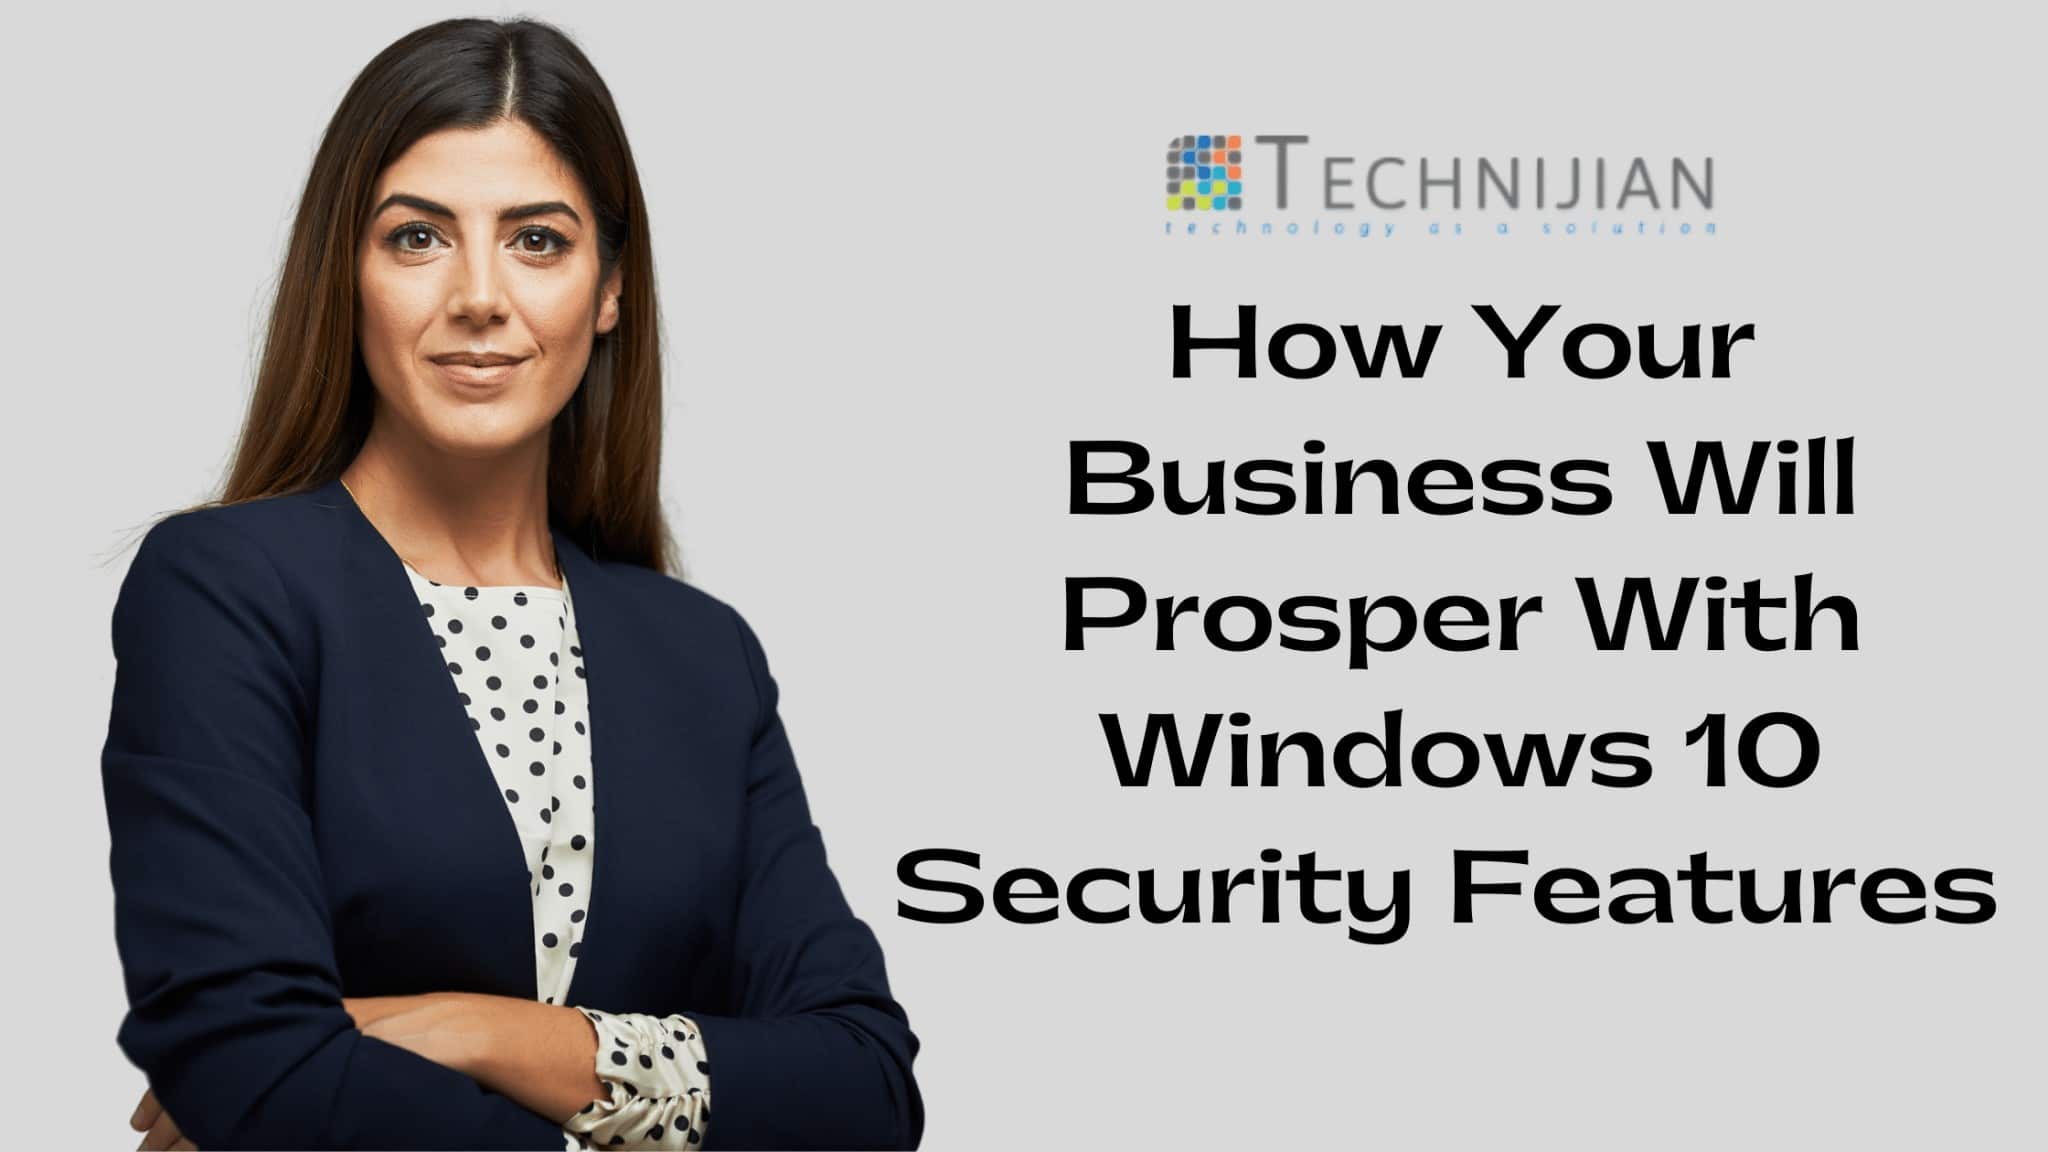 How Your Business Will Prosper With Windows 10 Security Features